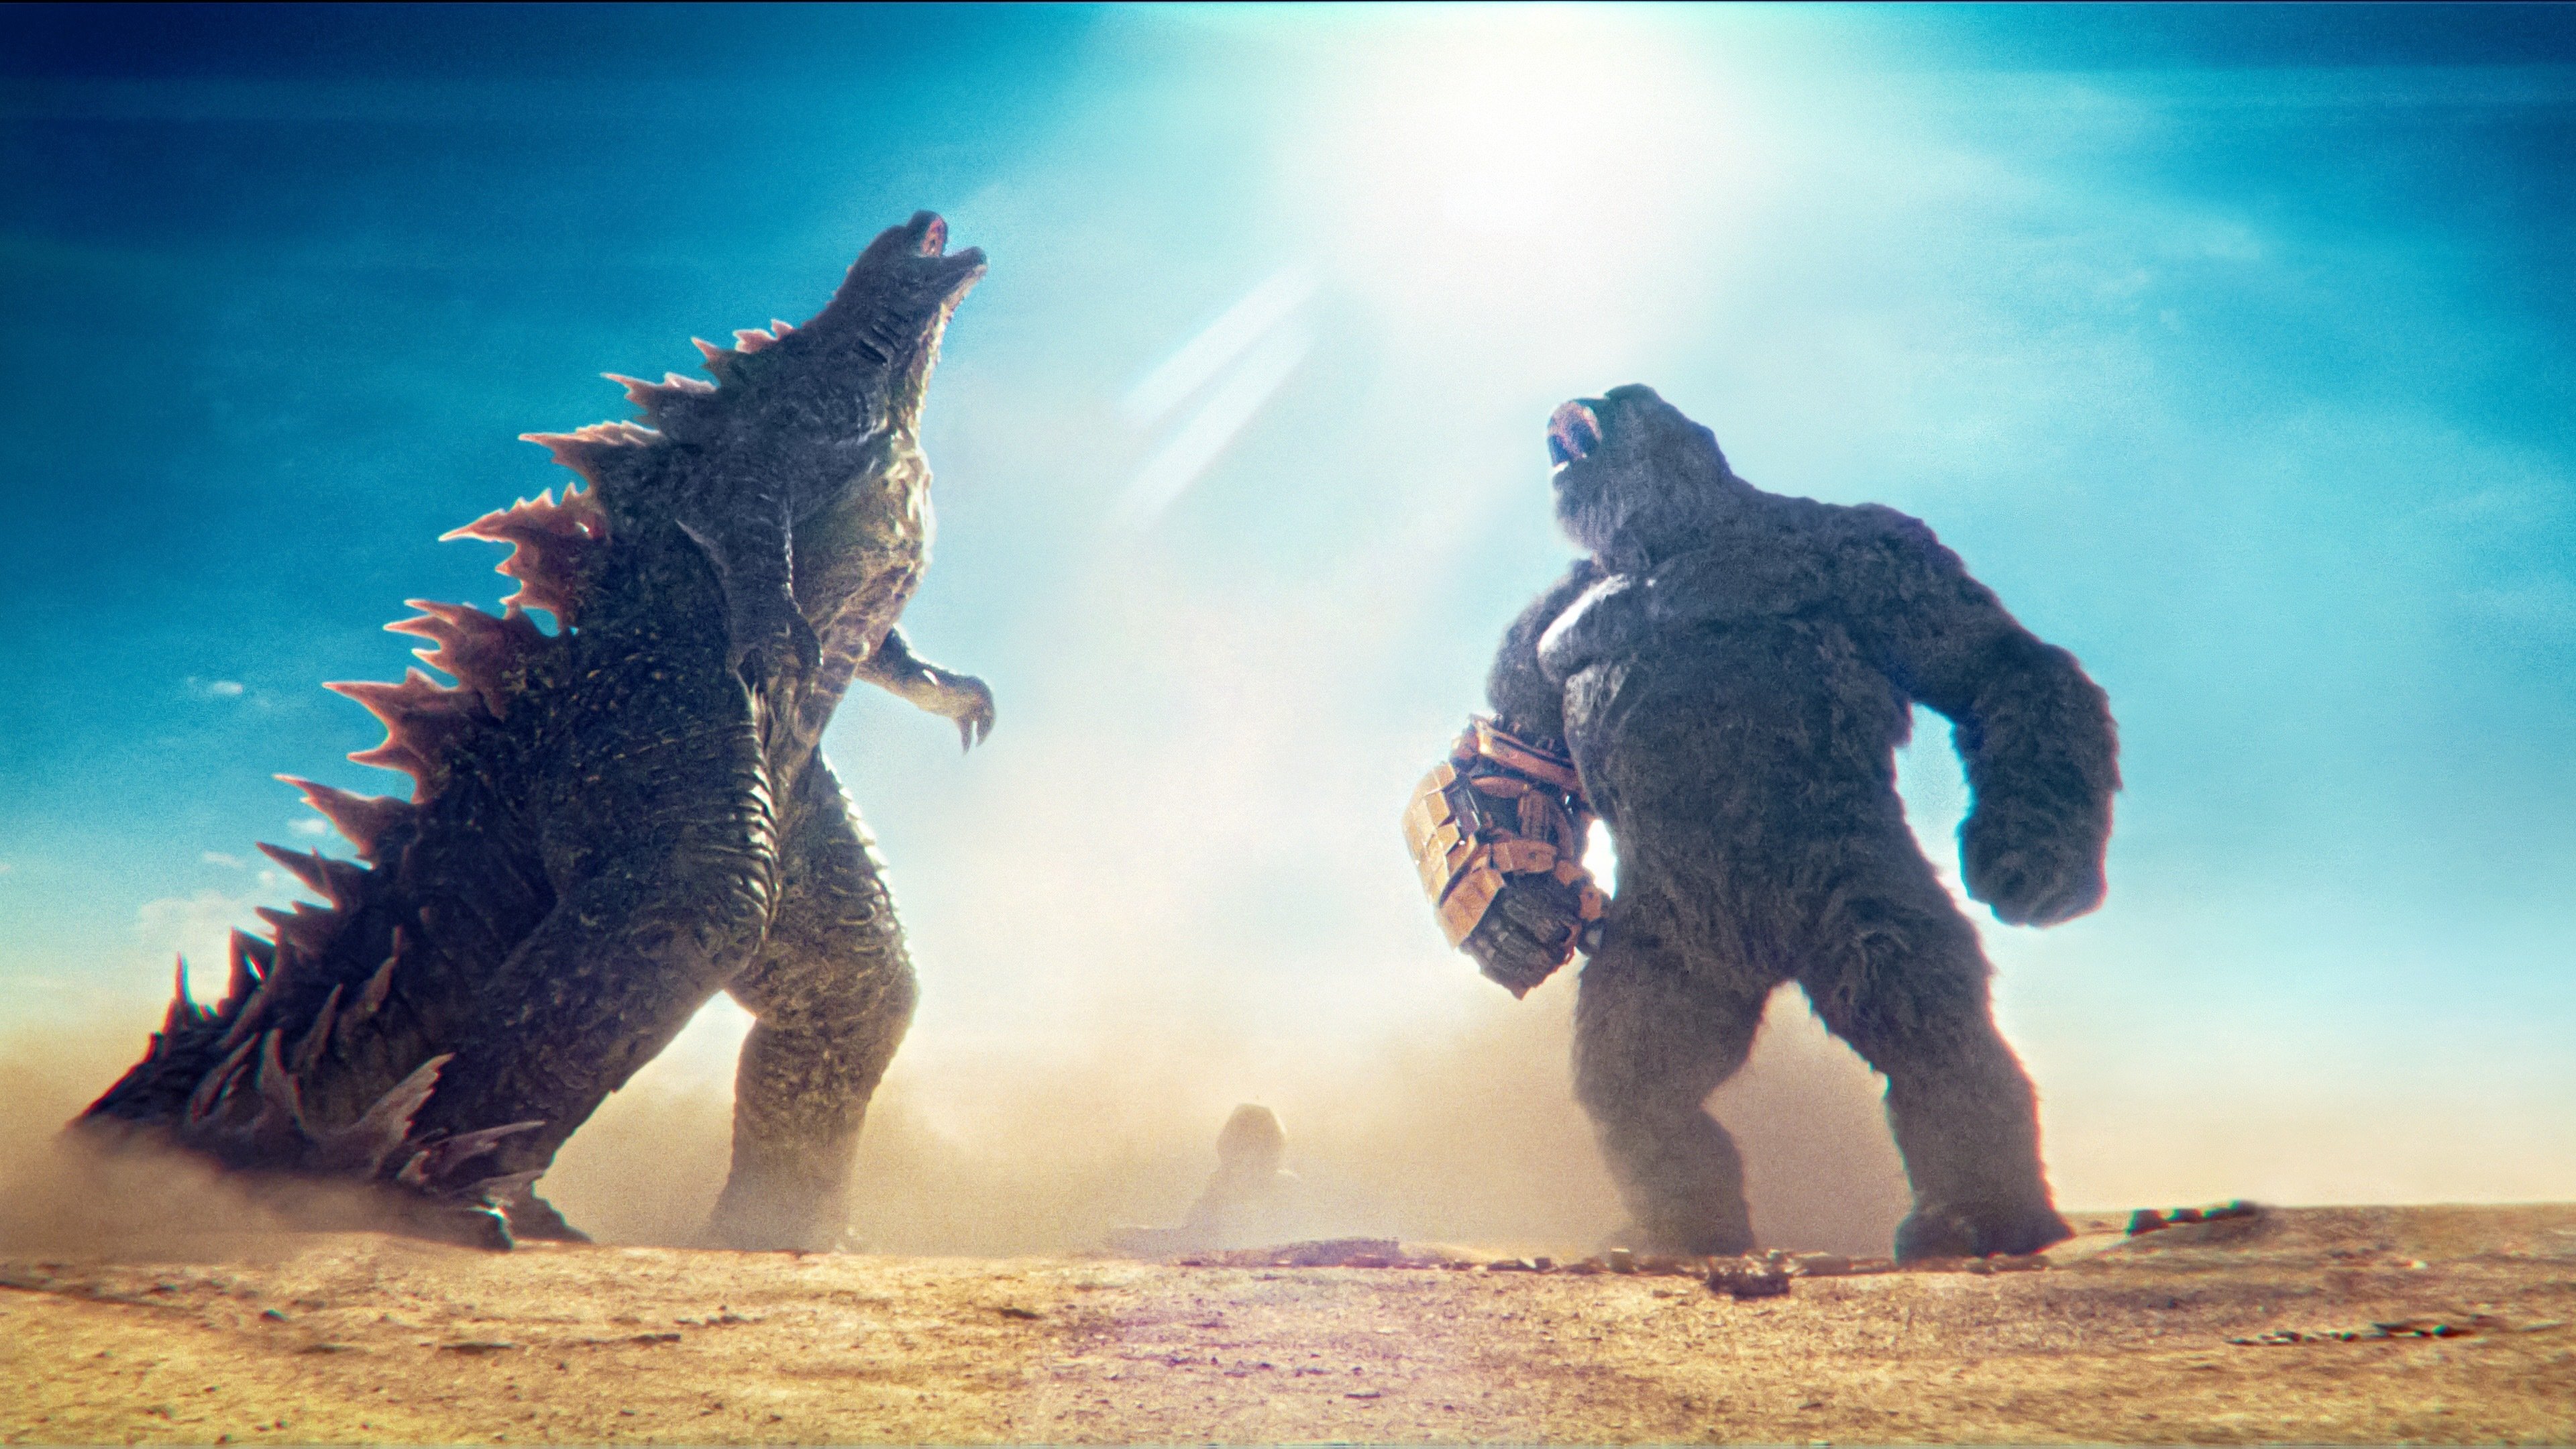 Godzilla and Kong roar together in 